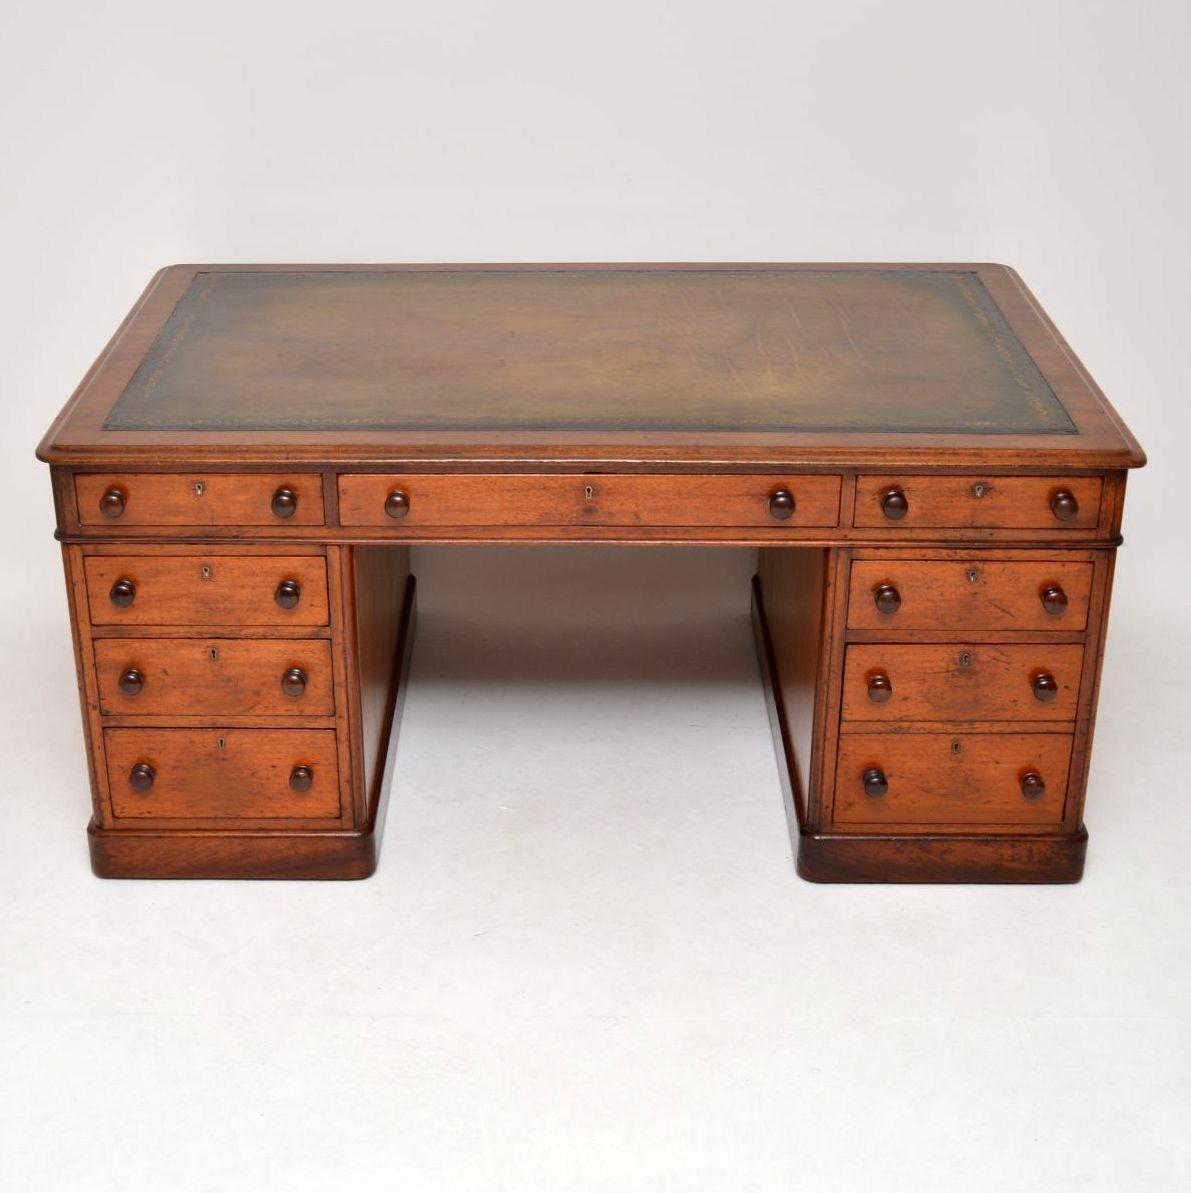 This antique Victorian mahogany partners desk is full of character and has natural ageing on parts of the surface. It’s in good original condition and free from splits or warps. The leather top is a hand colored one piece hide and it’s hand tooled.